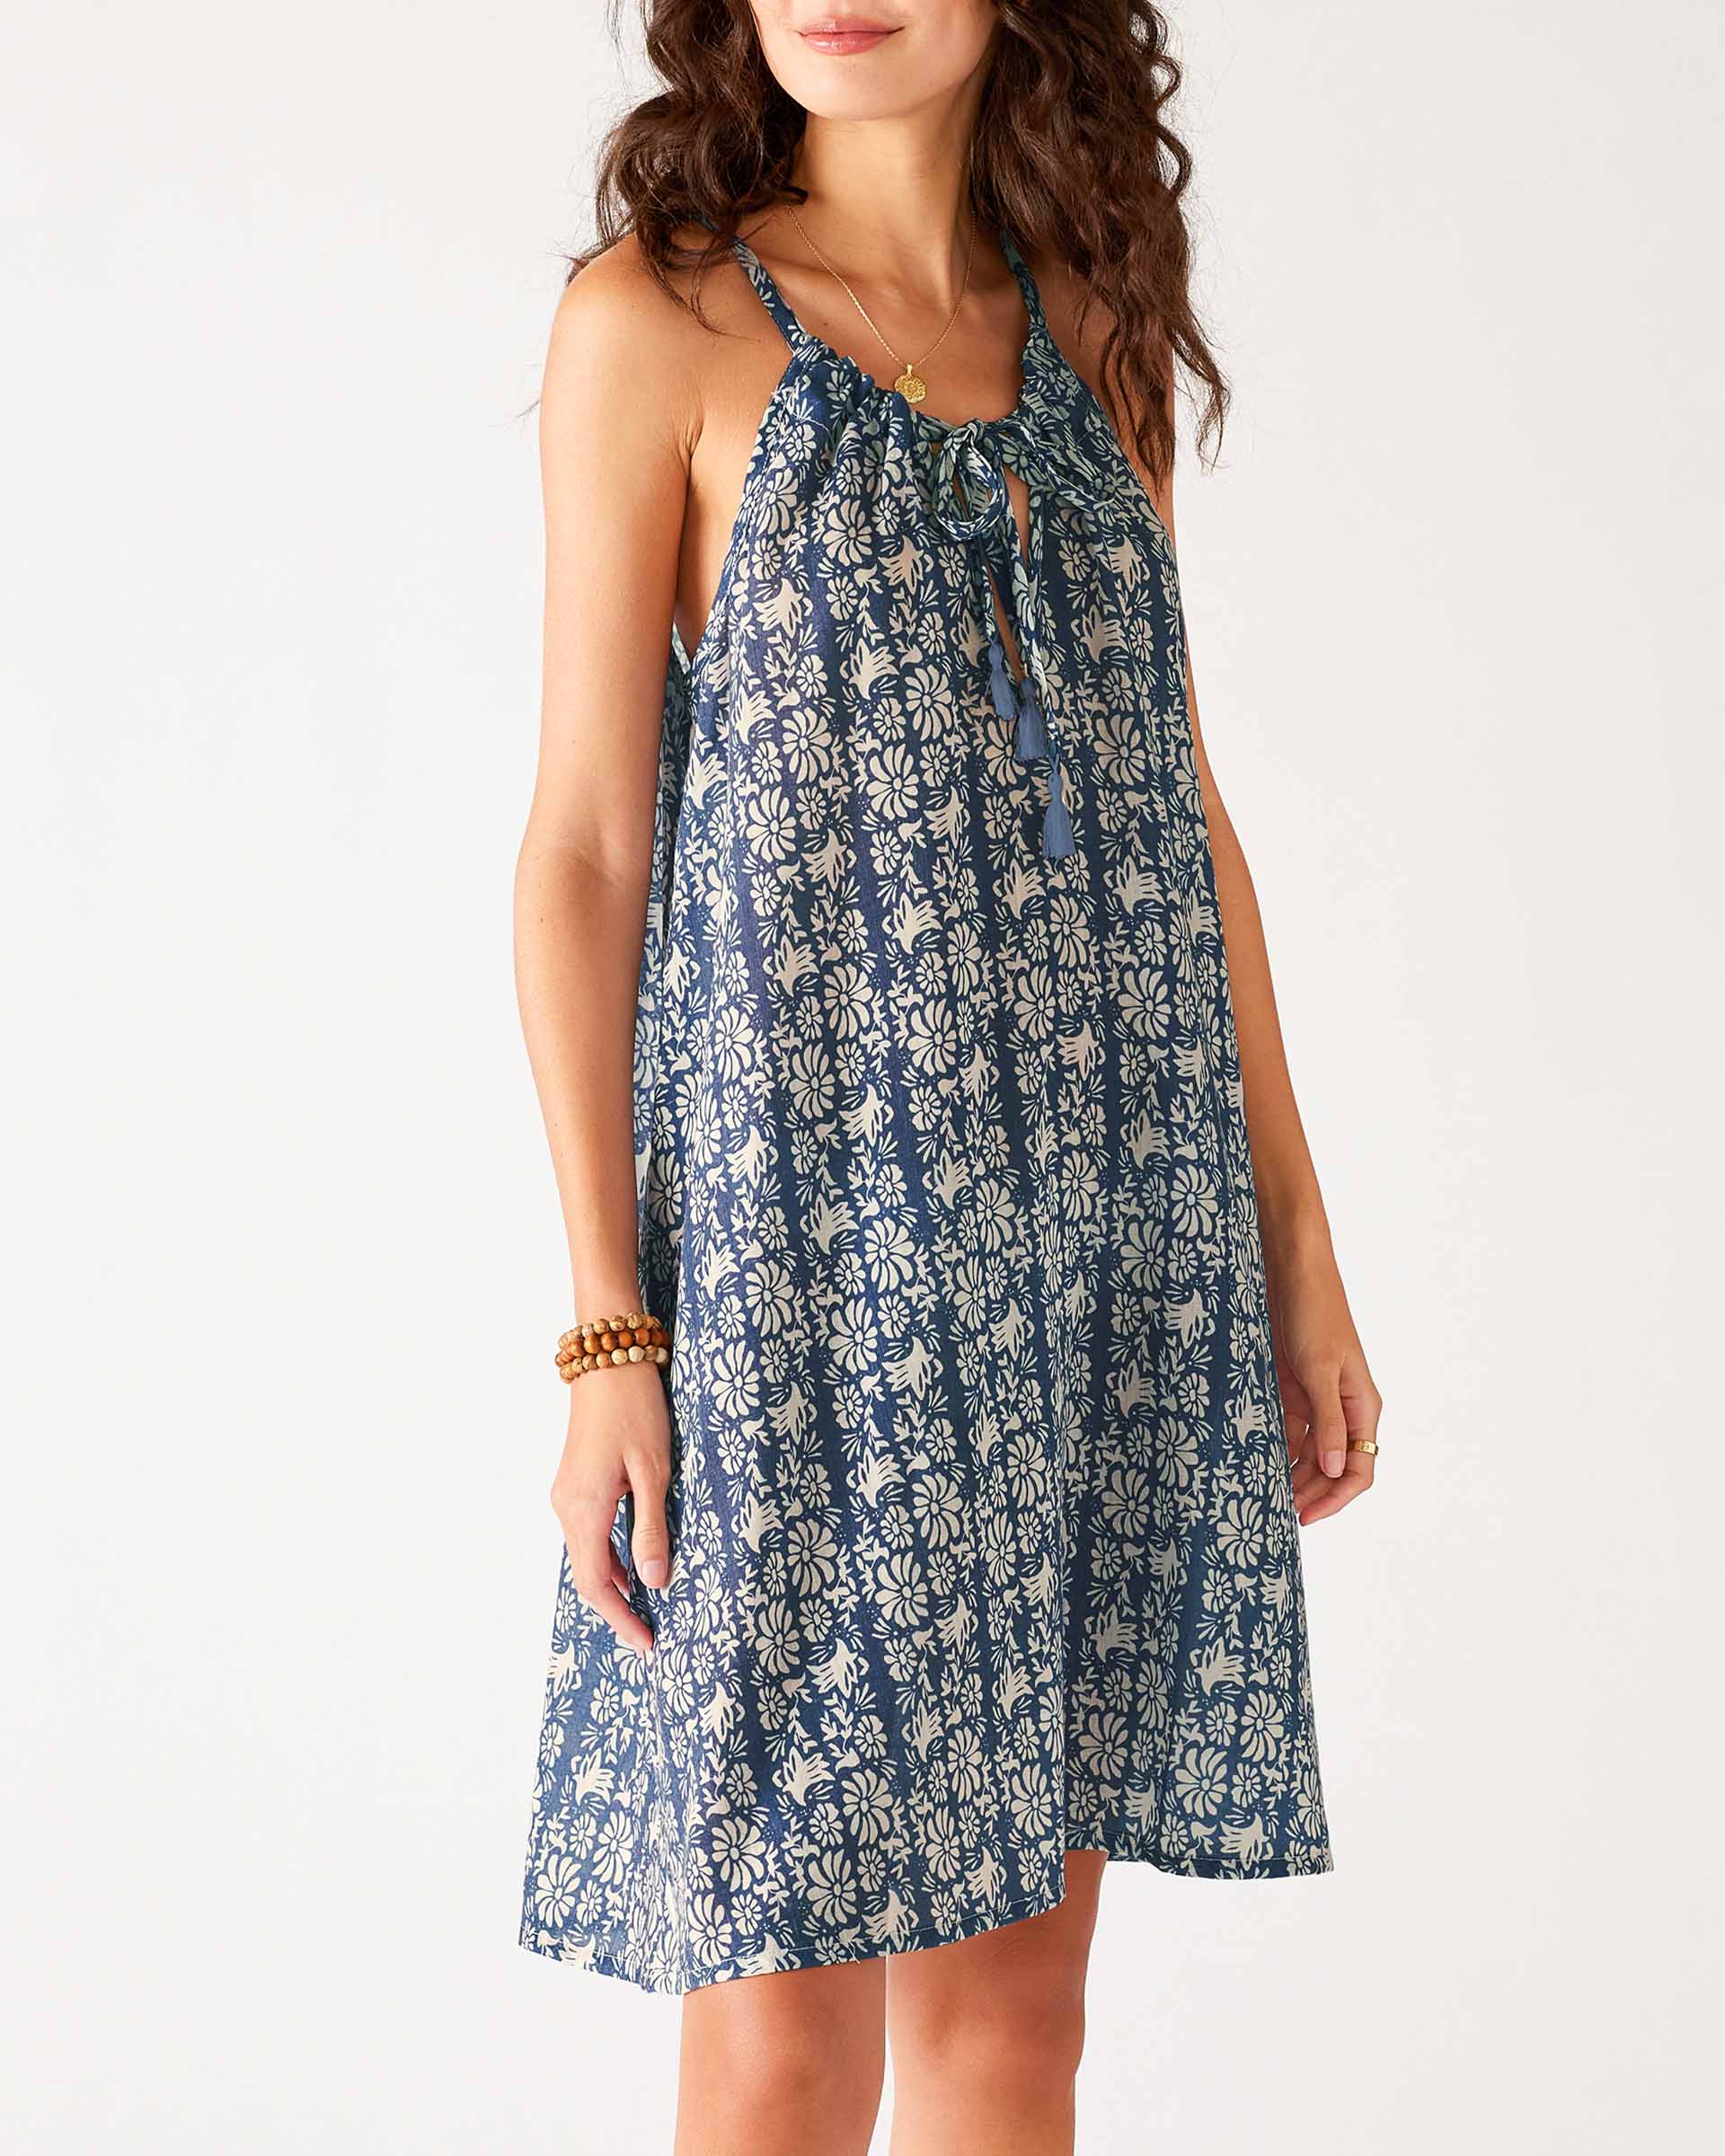 Women's Navy Floral Lightweight Knee Length Patio Drawstring Light and Breezy Dress Front View